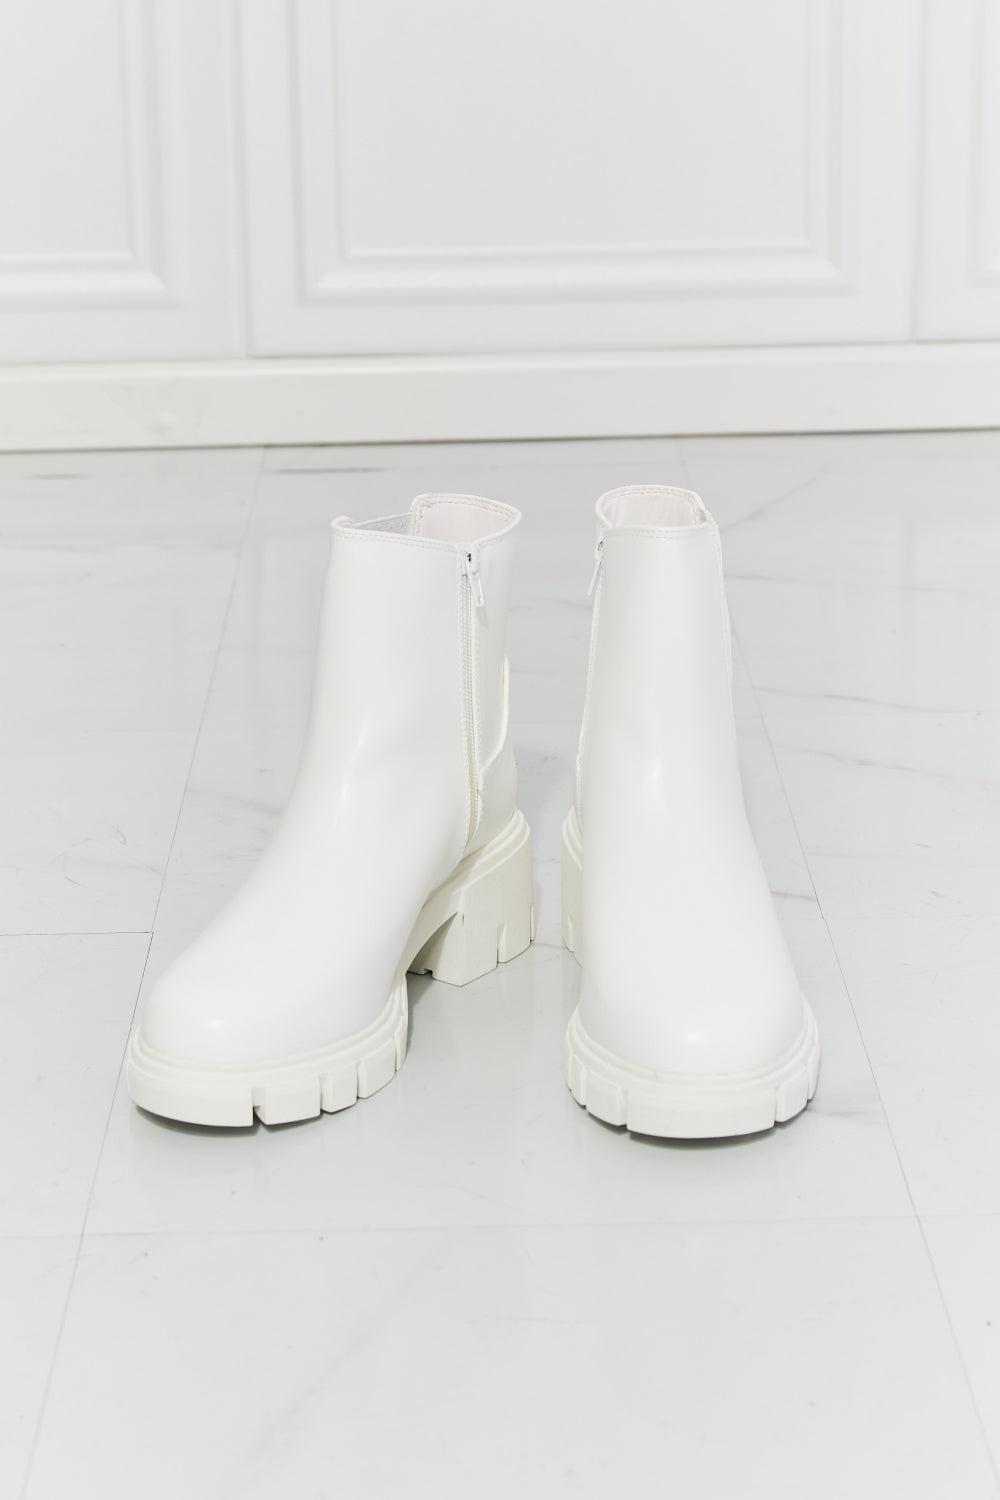 MMShoes What It Takes Lug Sole Chelsea Boots in White BLUE ZONE PLANET